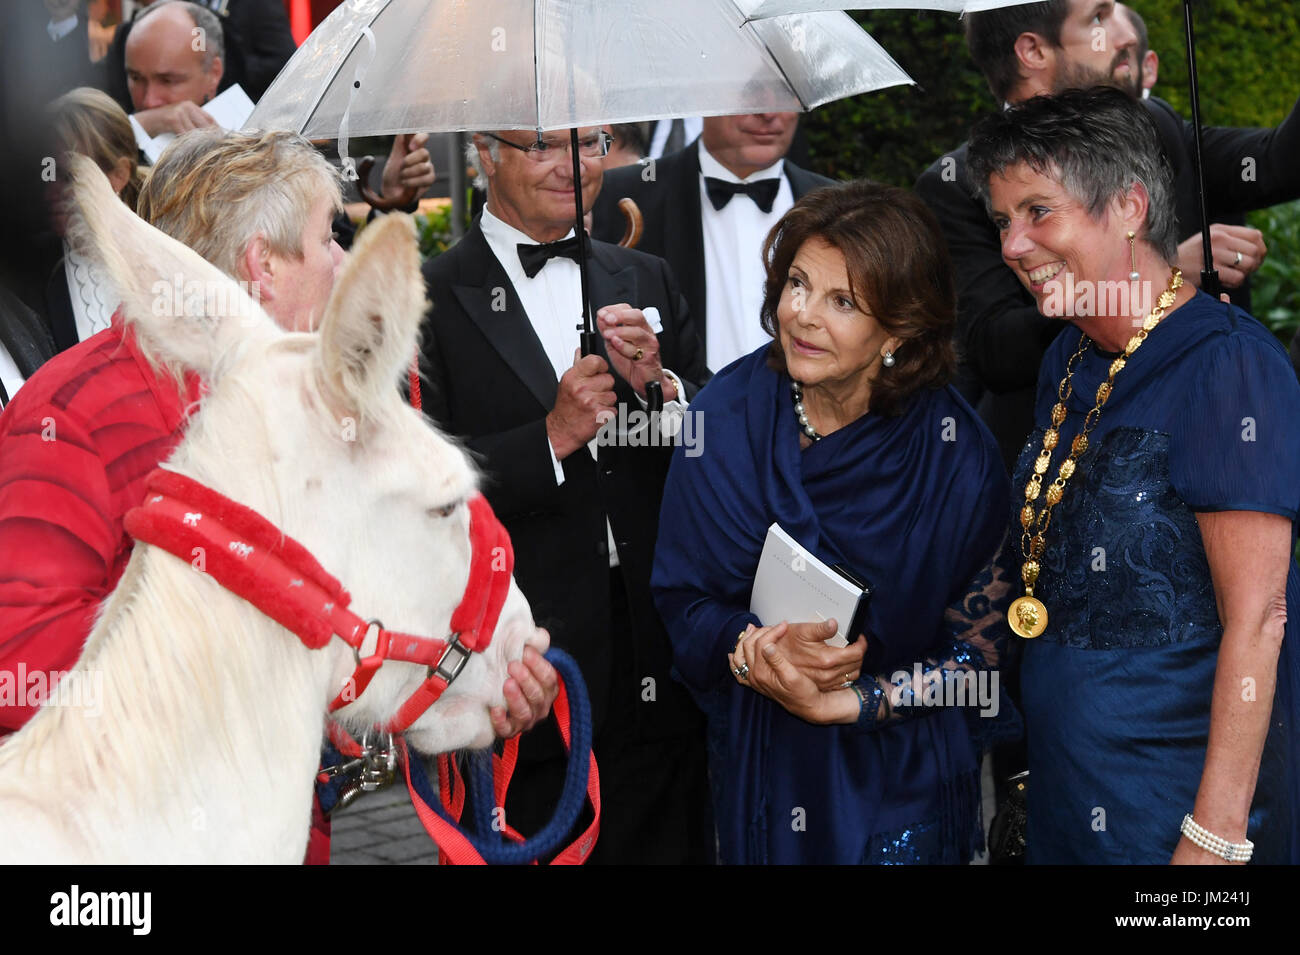 Bayreuth, Germany. 25th July, 2017. Mayoress of Bayreuth Brigitte Merk-Erbe (r-l), Sweden's Queen Silvia, Sweden's King Carl Gustaf (with umbrella) and a staff member from the Neusiedler See National Park with a white donkey, pictured at the opening of the Bayreuth Festival in Bayreuth, Germany, 25 July 2017. The donkey was brought into the garden of the Festspielhaus by the national park staff to show the Swedish royal couple. Photo: Tobias Hase/dpa/Alamy Live News Stock Photo